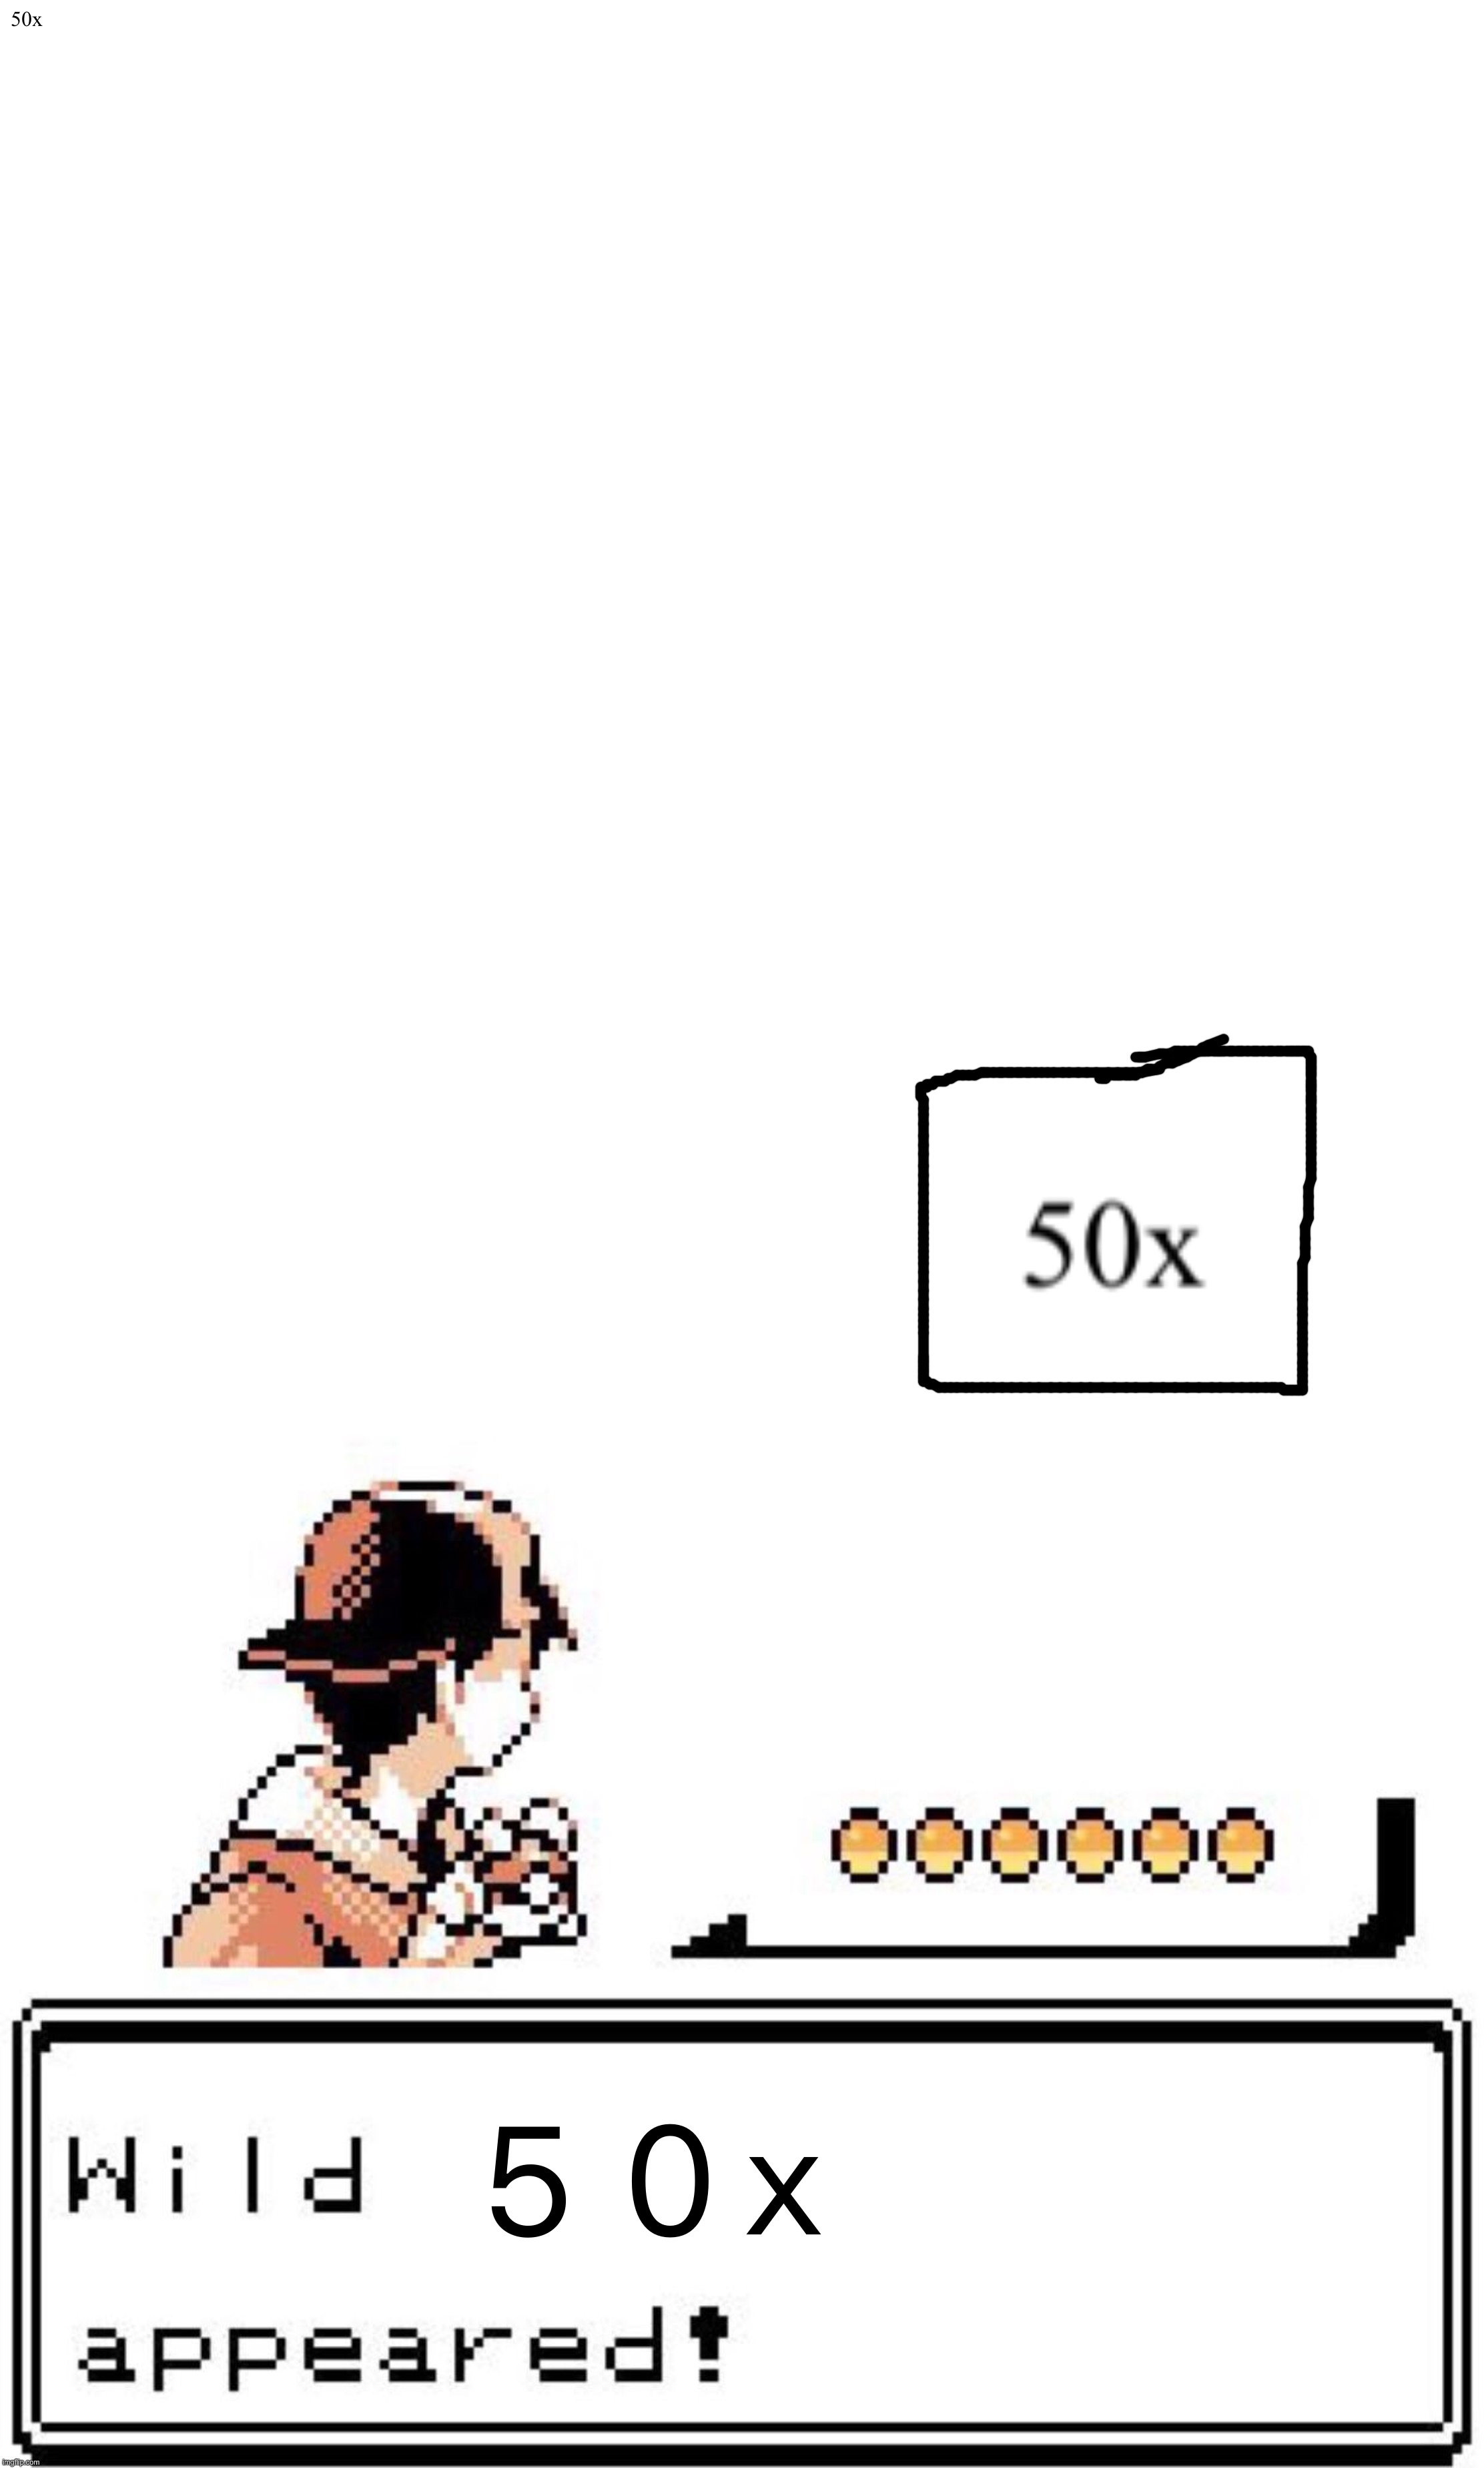 Meanwhile when going to a random imgflip image, a wild textbox labelled “50x” appeared. | 50x | image tagged in blank wild pokemon appears,memes,50x,texts,textbox,html | made w/ Imgflip meme maker